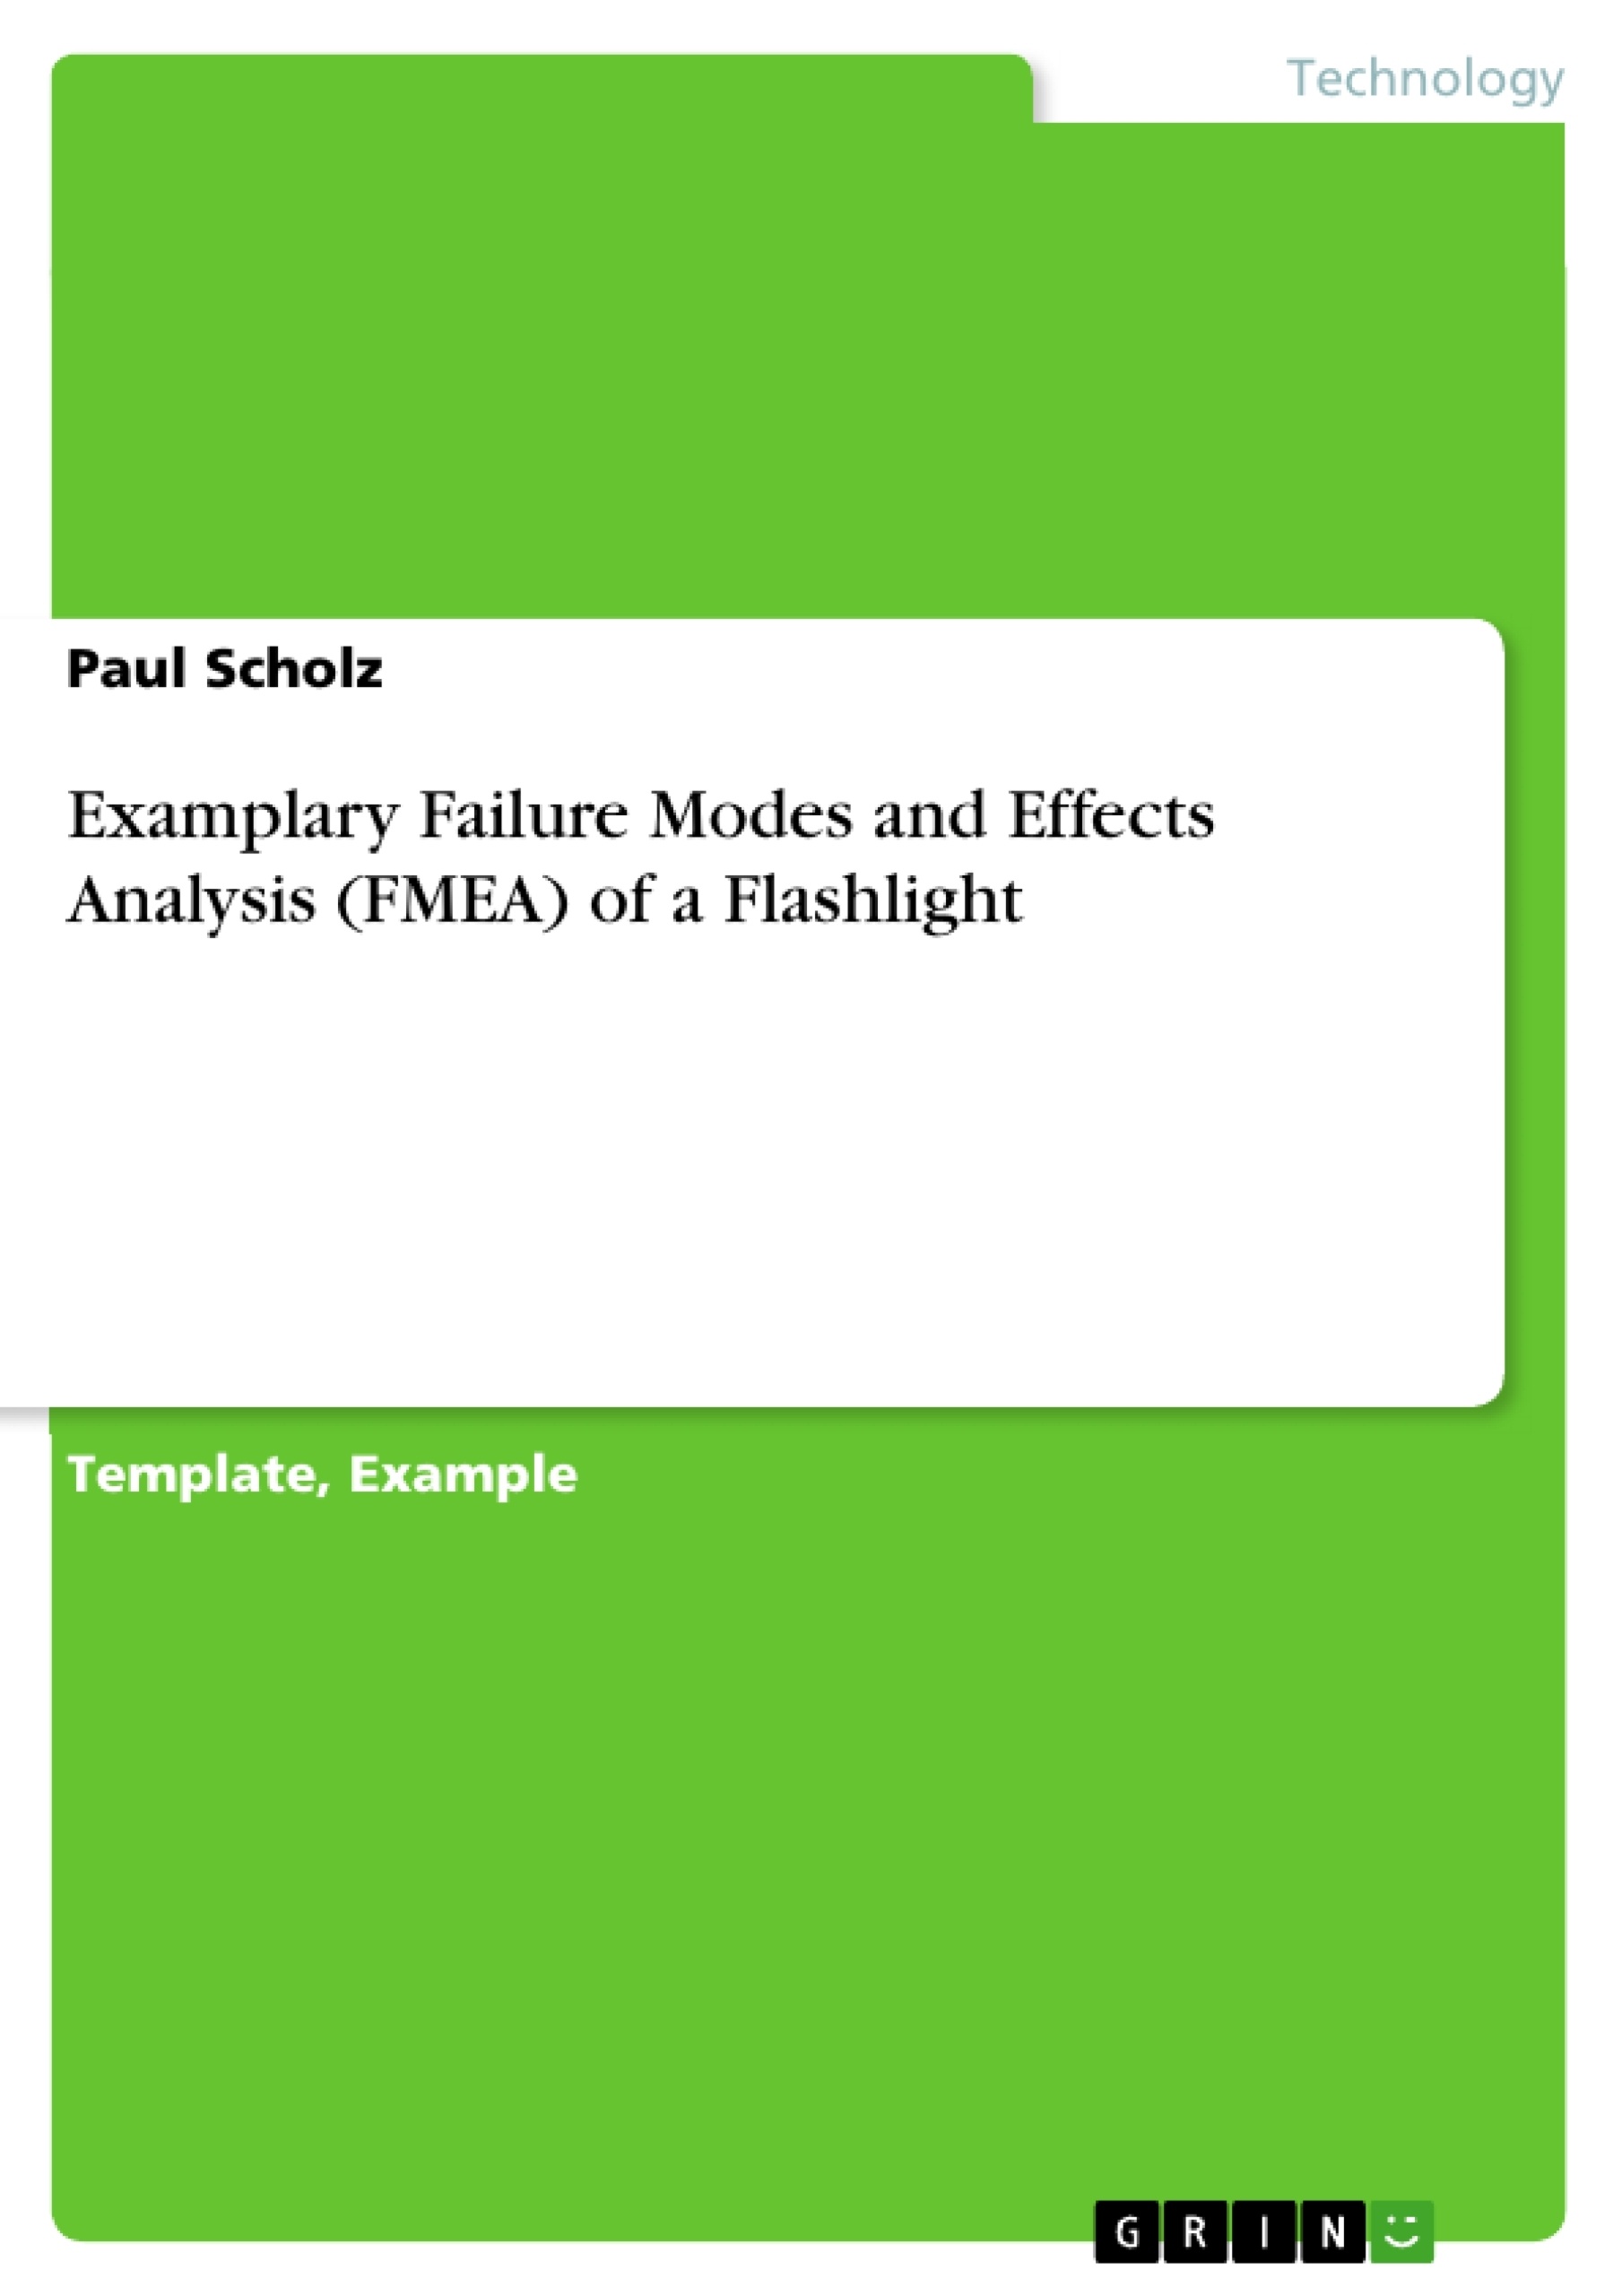 Título: Examplary Failure Modes and Effects Analysis (FMEA) of a Flashlight